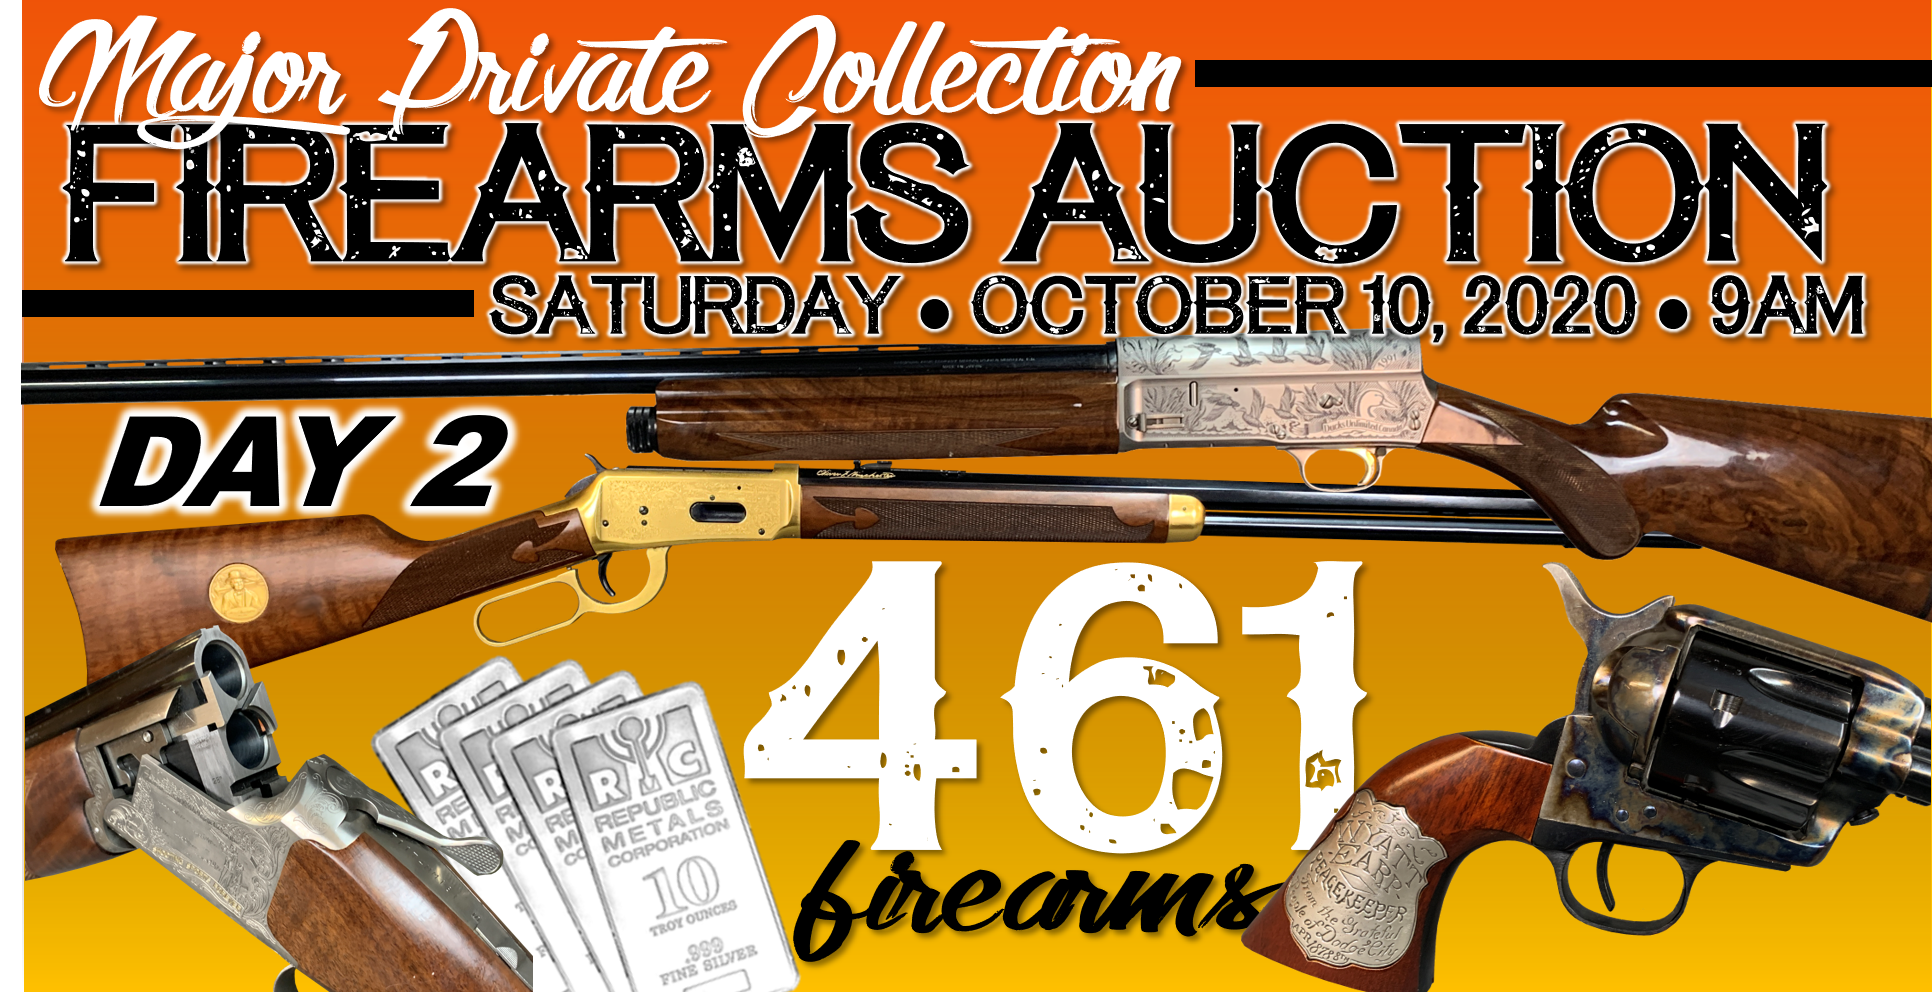 MAJOR PRIVATE COLLECTION FIREARMS AUCTION – DAY 2